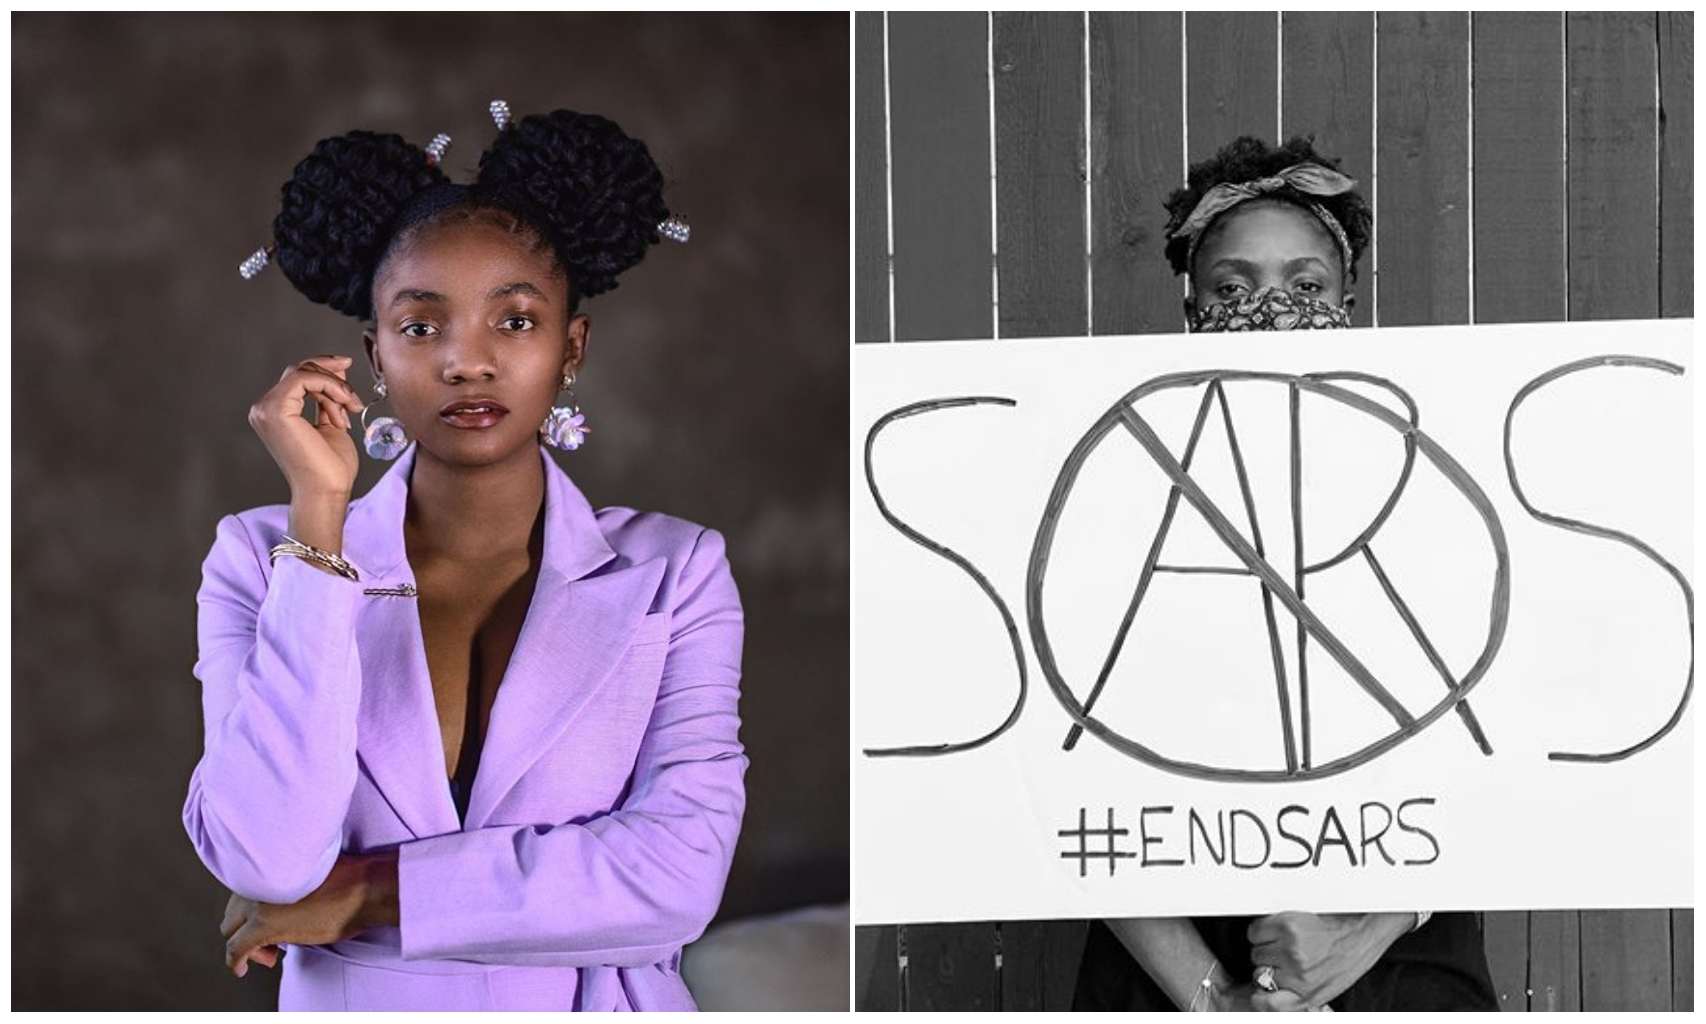 EndSars: Karma will find all you wicked, heartless people – Simi attacks SARS operatives